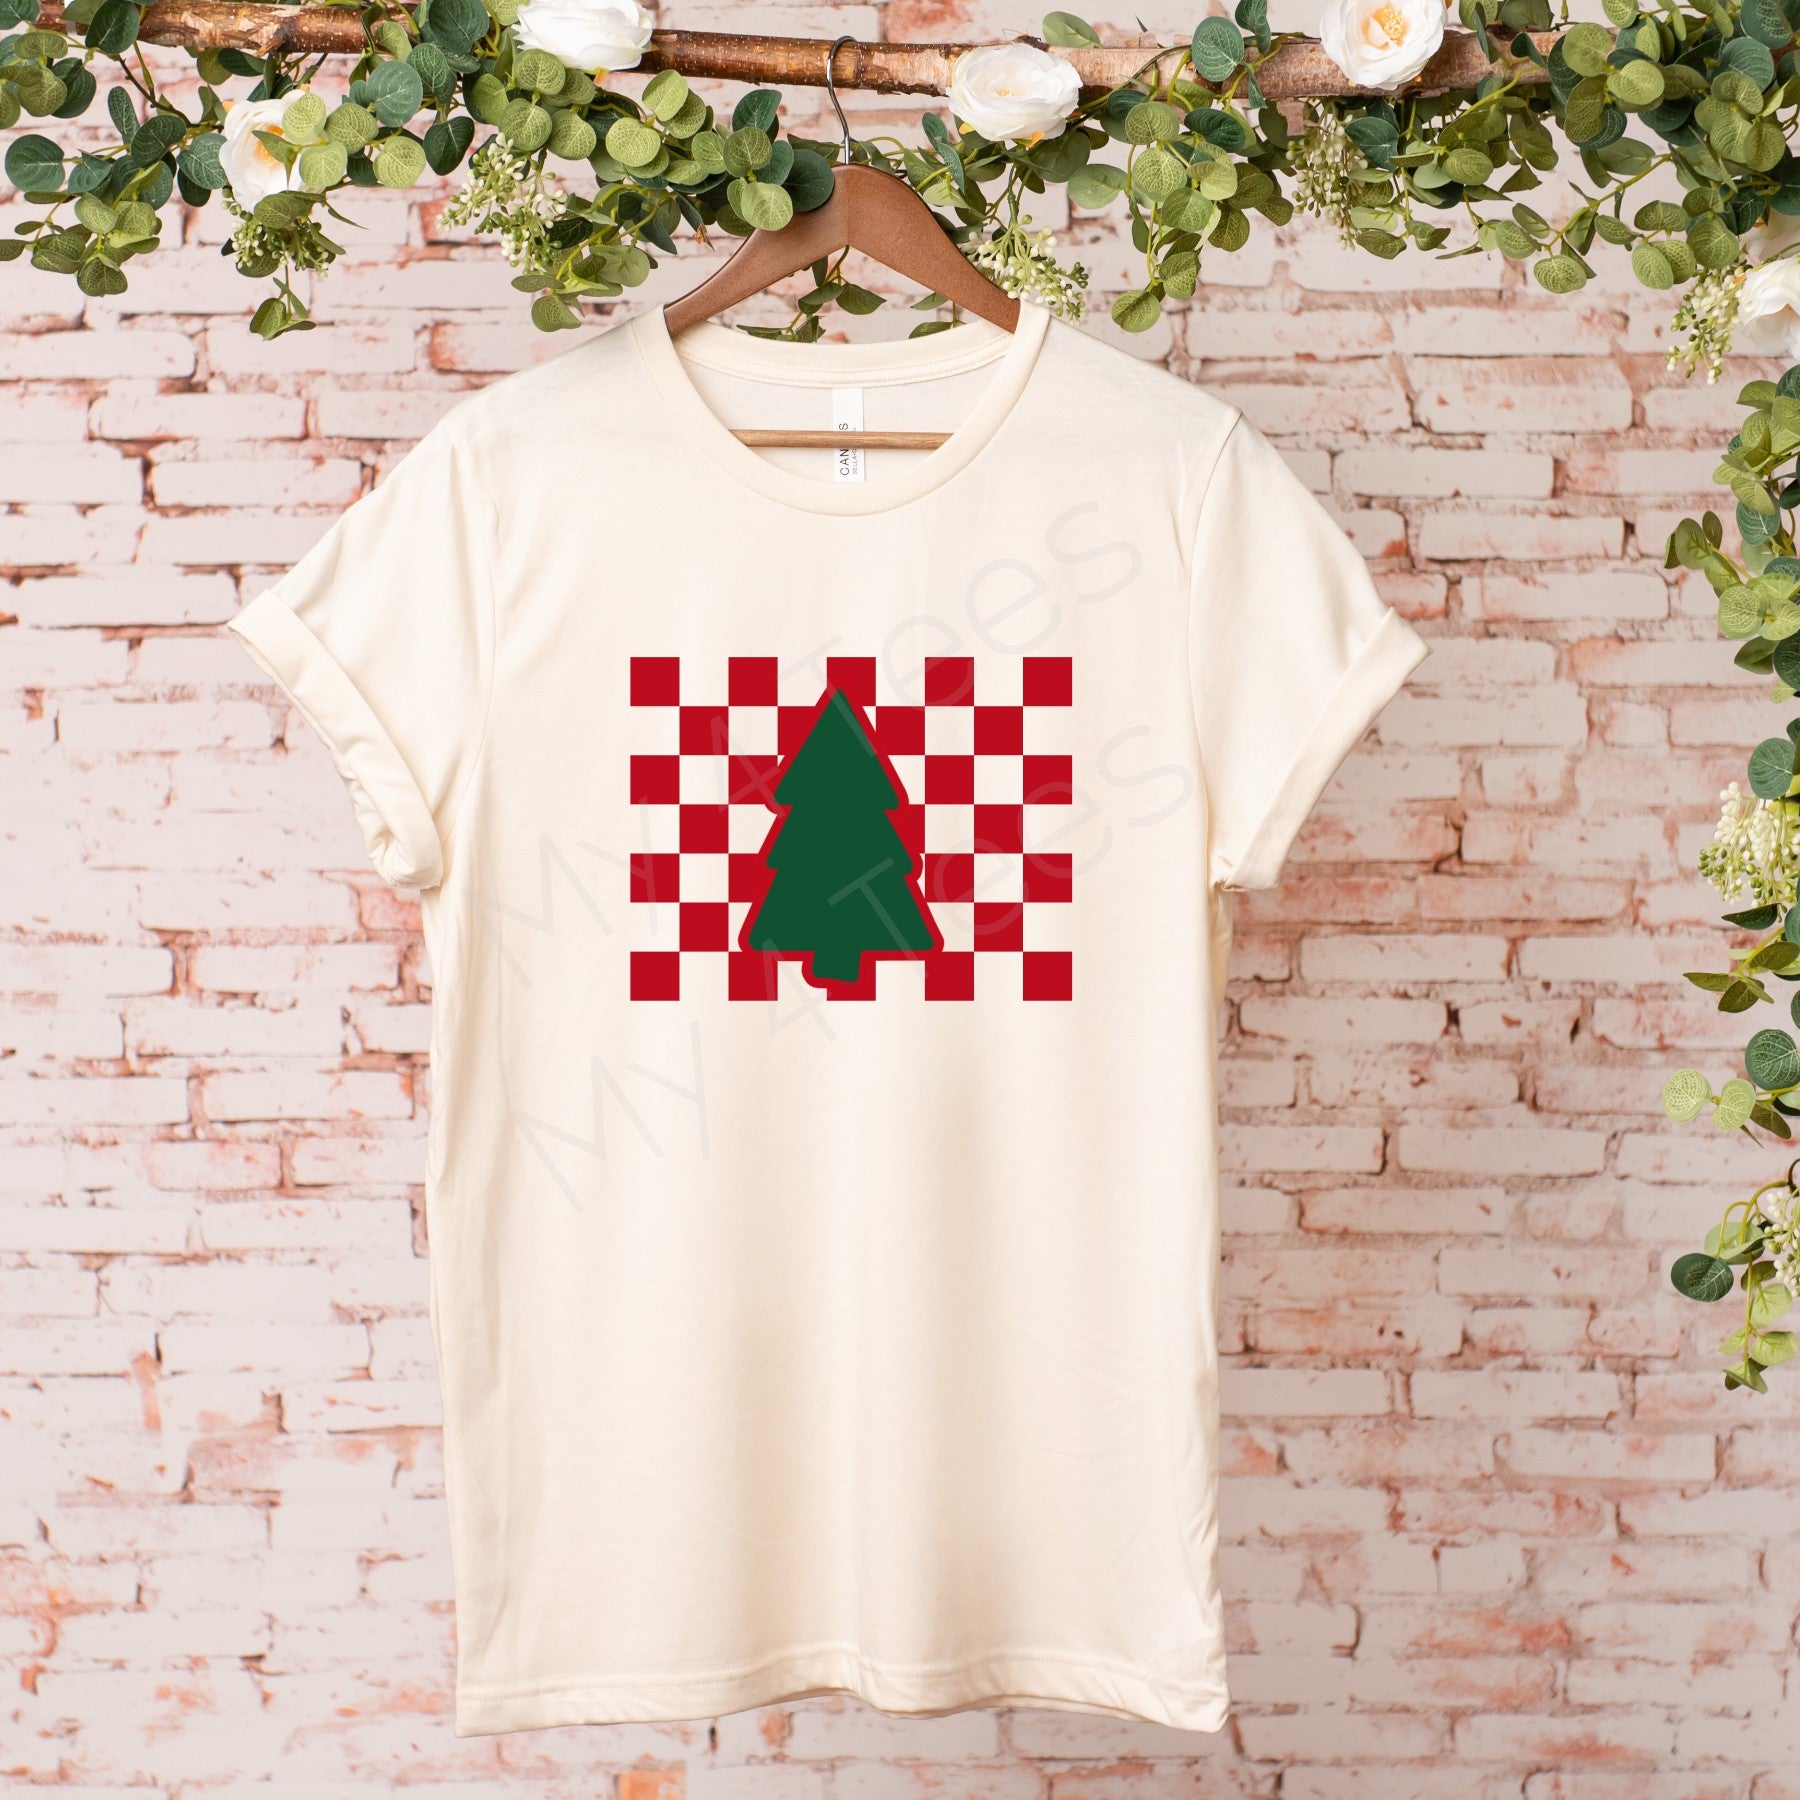 Christmas tree holiday graphic tee in Cream  |  Checkerboard tree Christmas t-shirt in youth & adult sizes